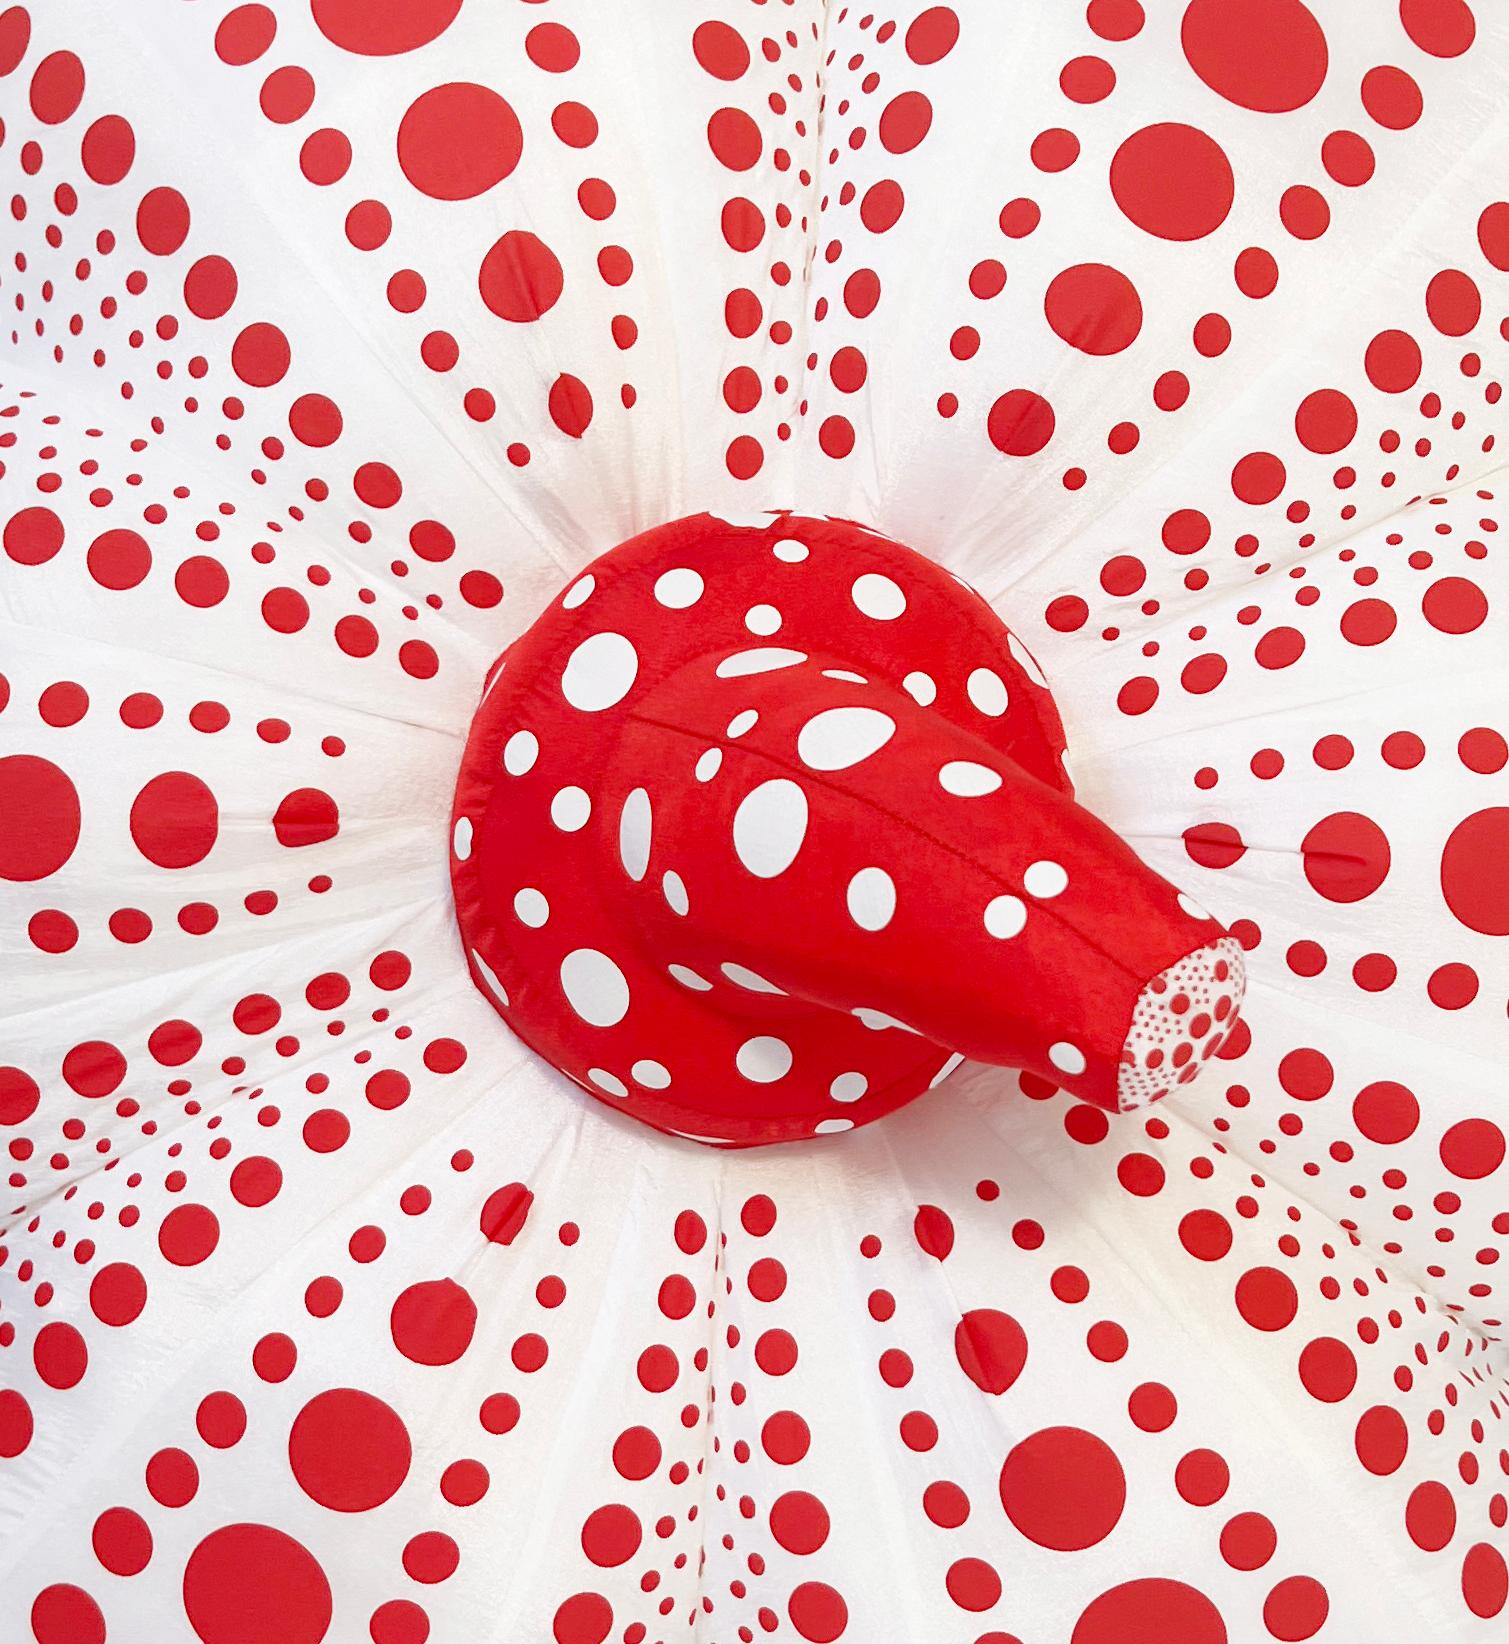 Yayoi Kusama Pumpkins (set of 2 large plush pumpkins):
An iconic, vibrantly colored pop art set - these large Kusama plush pumpkins feature the universal polka dot patterns and bold colors for which the artist is perhaps best known. Kusama first